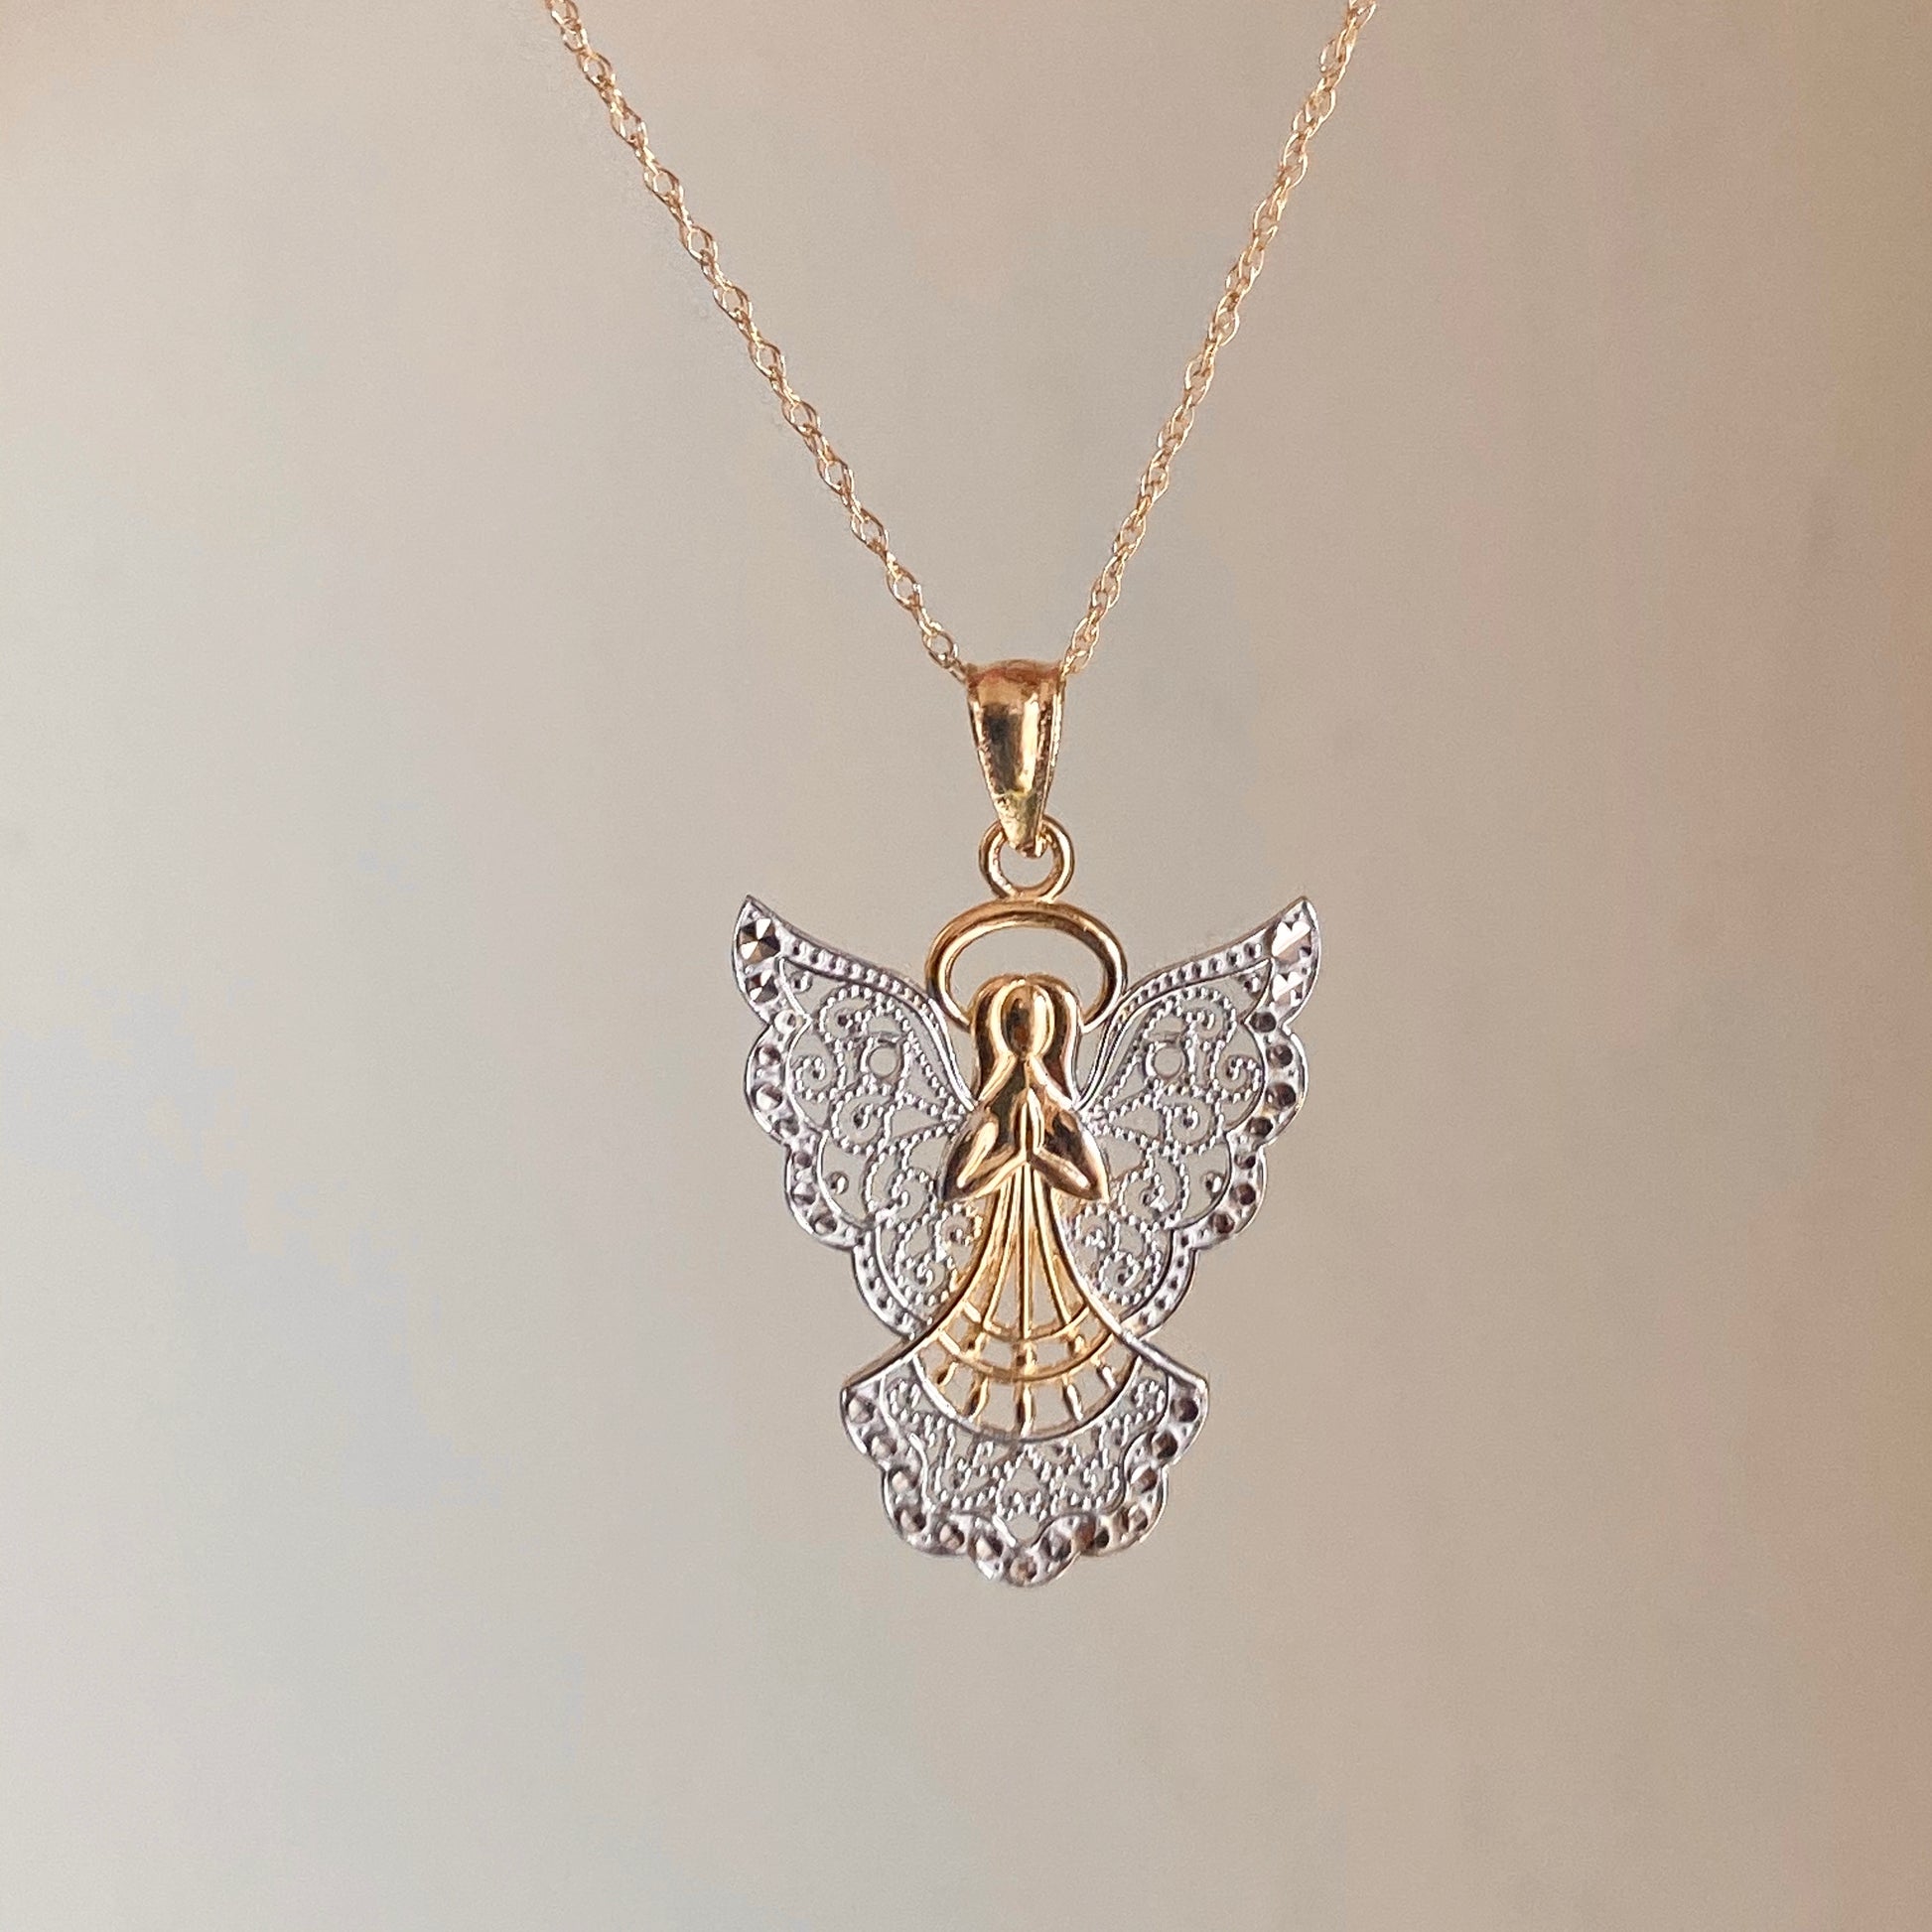 Two-Tone 14KT Yellow Gold + White Rhodium Filigree Guardian Angel Pendant Chain Necklace, Two-Tone 14KT Yellow Gold + White Rhodium Filigree Guardian Angel Pendant Chain Necklace - Legacy Saint Jewelry